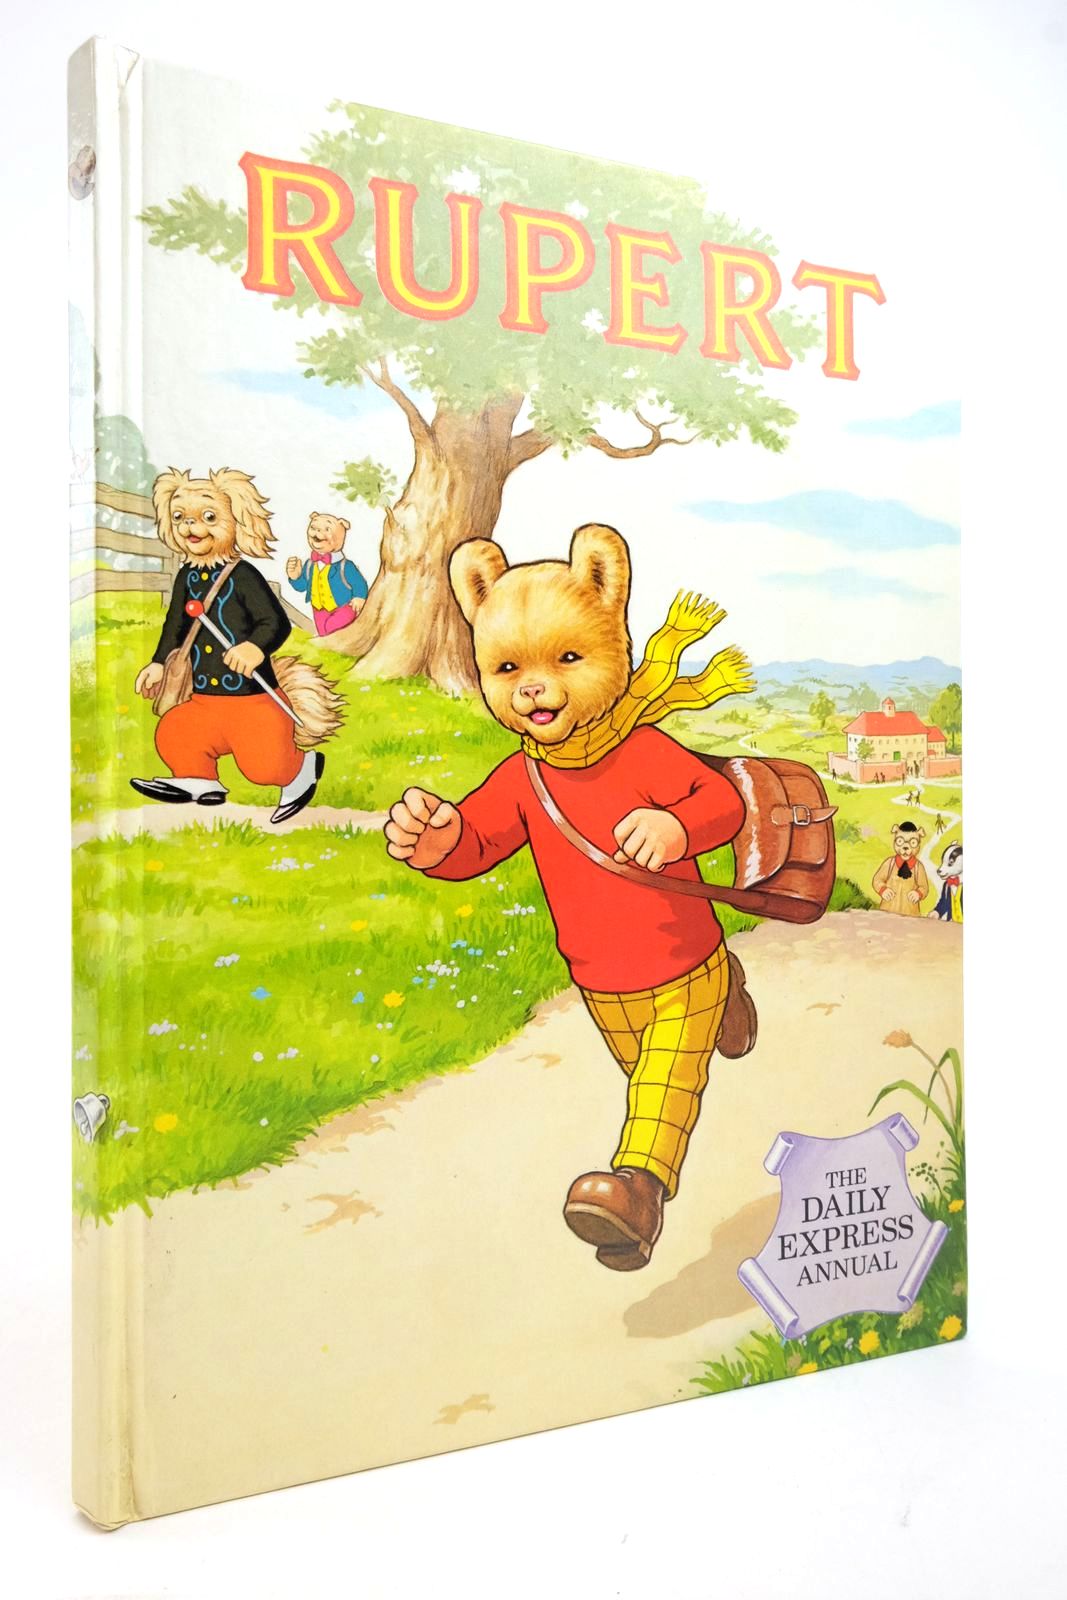 Photo of RUPERT ANNUAL 1984 illustrated by Harrold, John published by Express Newspapers Ltd. (STOCK CODE: 2136818)  for sale by Stella & Rose's Books